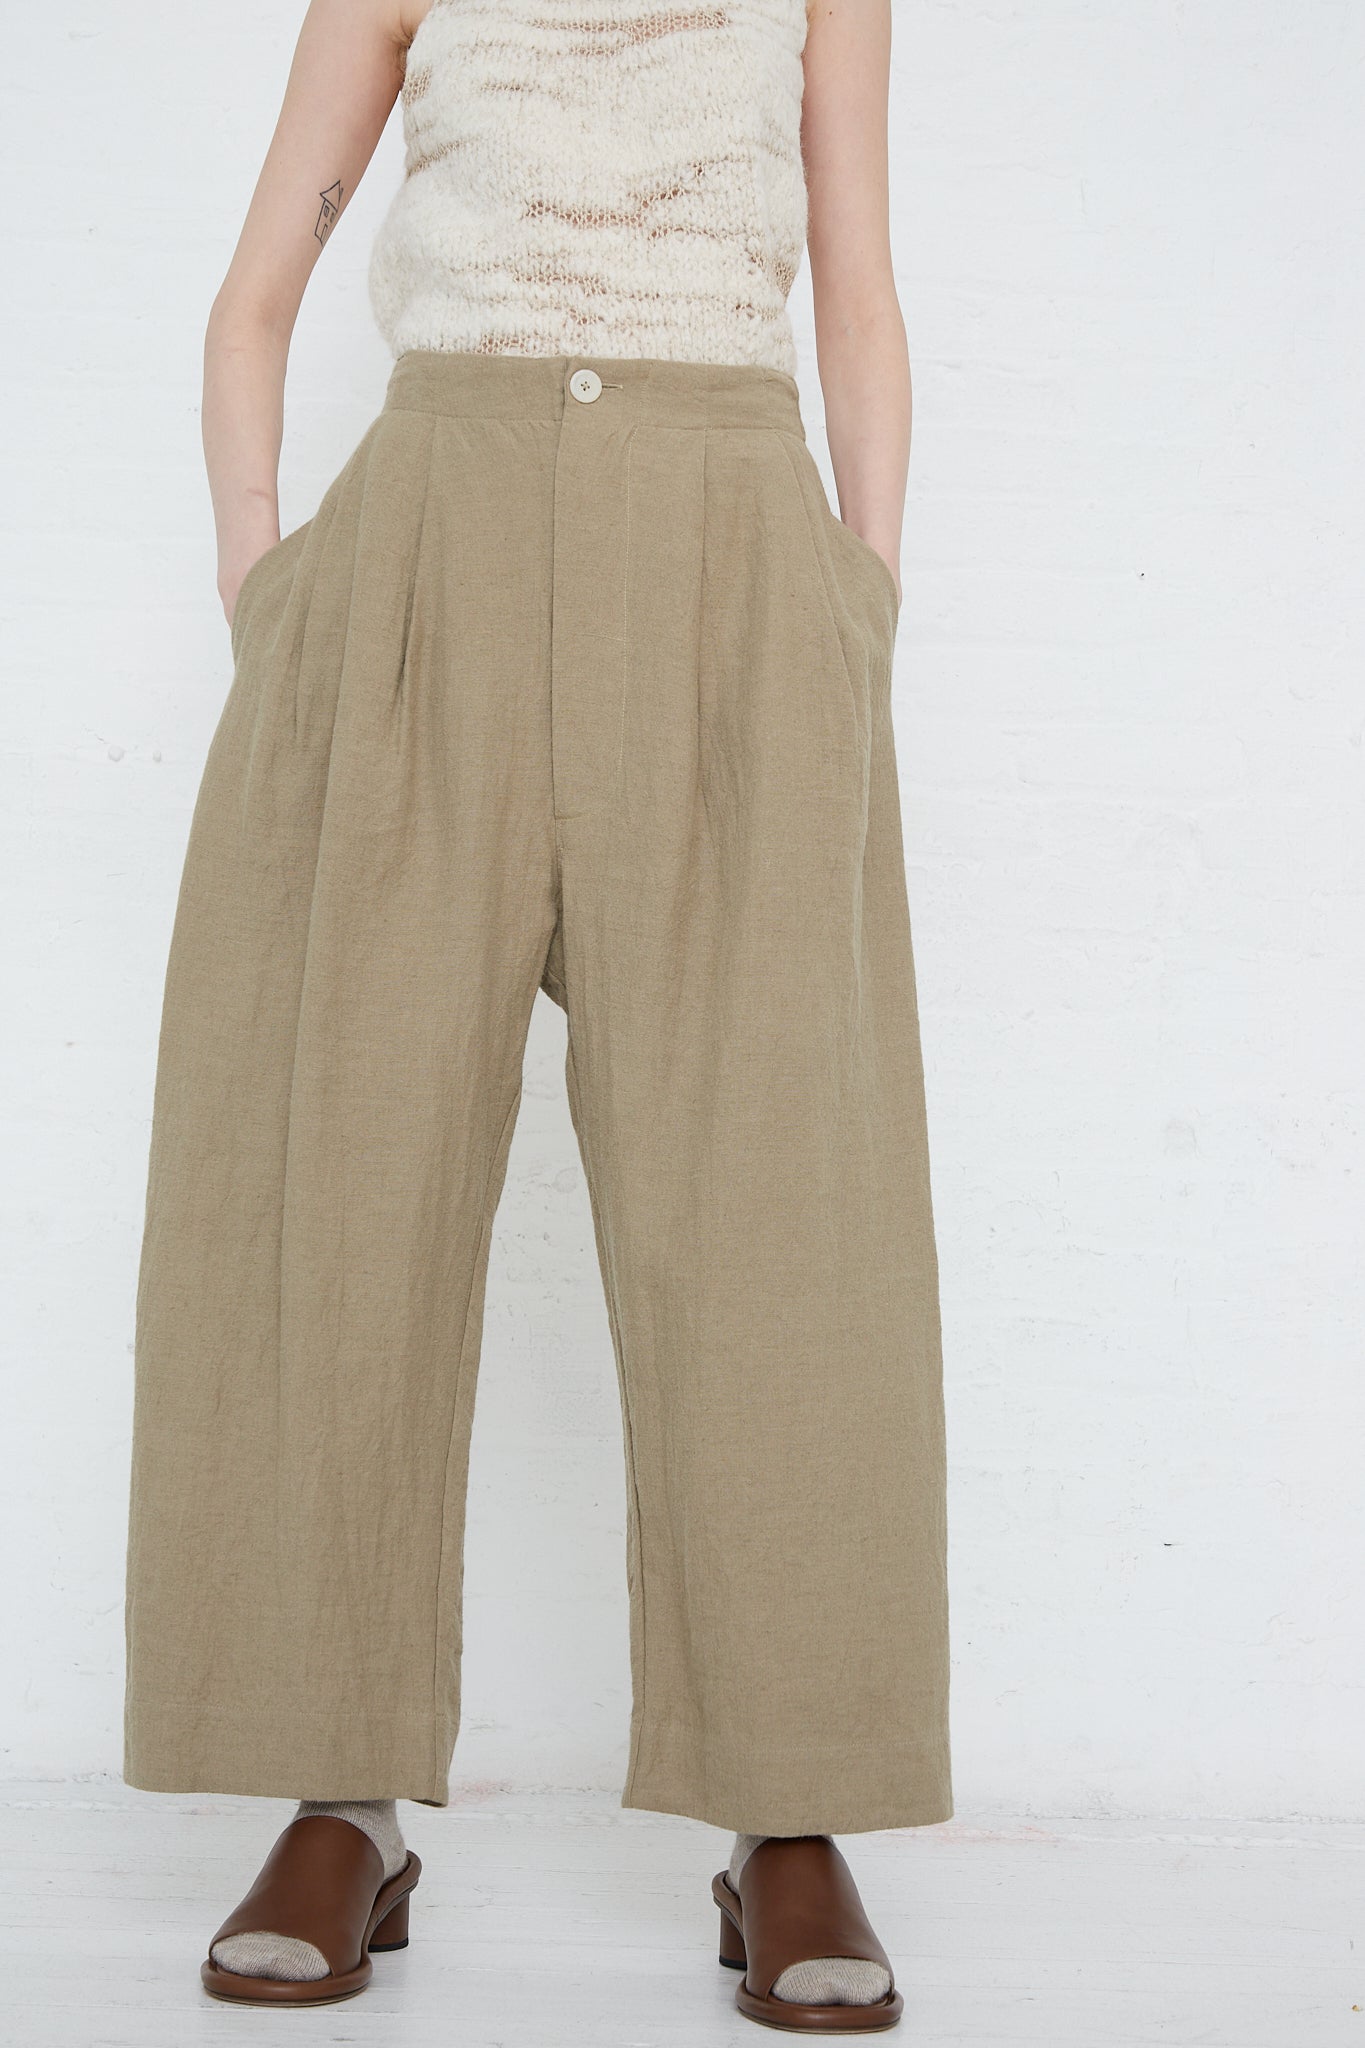 A woman wearing the Lauren Manoogian Linen and Wool Como Trouser in Clay wide leg khaki pants and a white top.